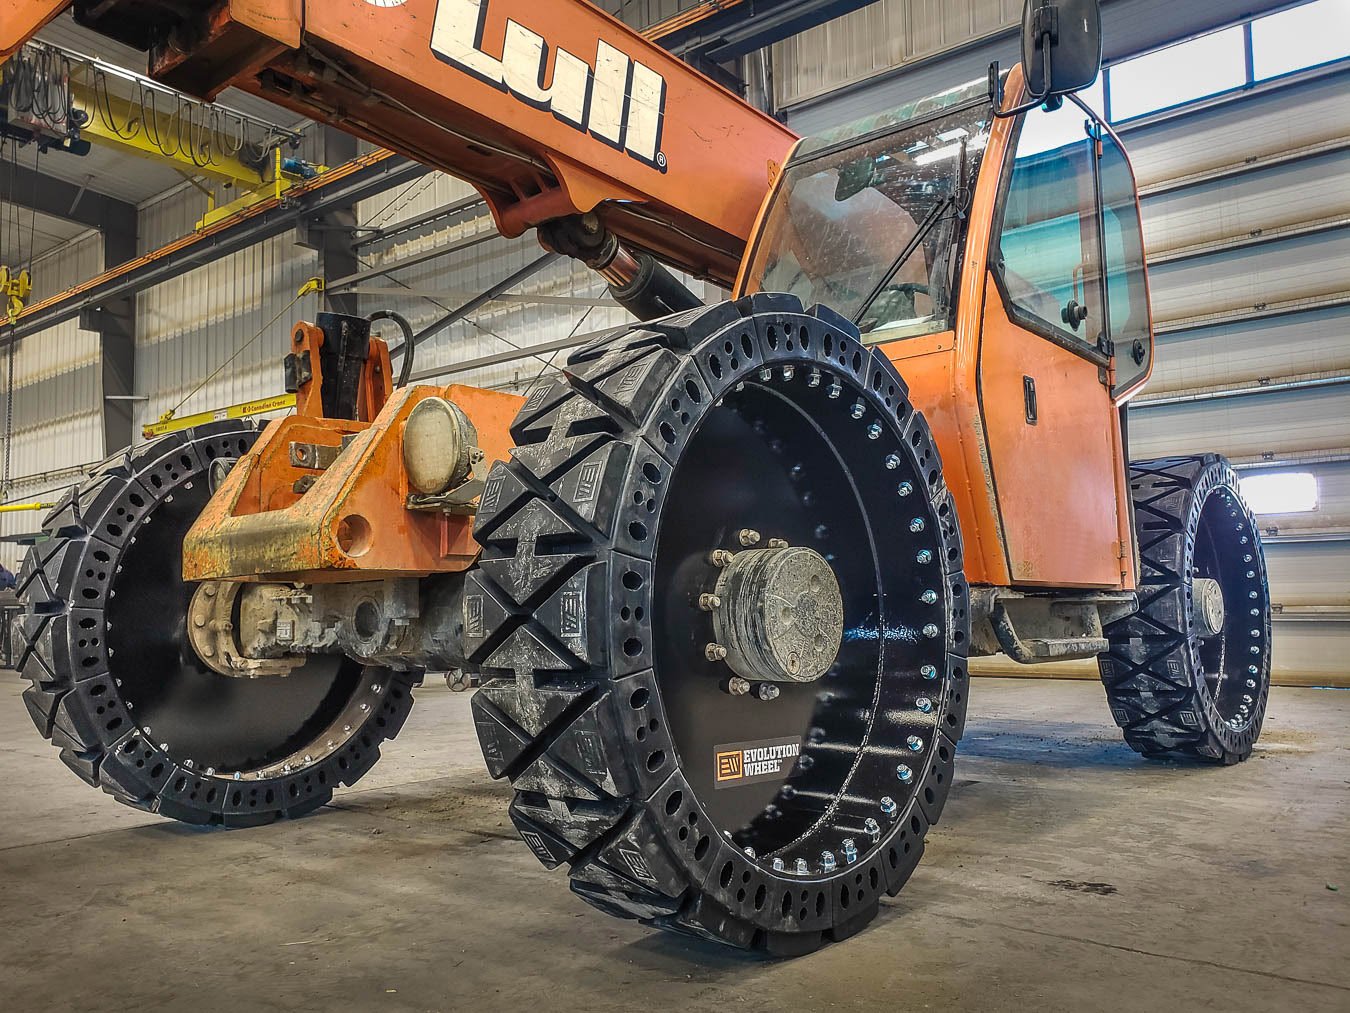 This picture shows our Xtreme telehandler tires on an orange Lull telehandler